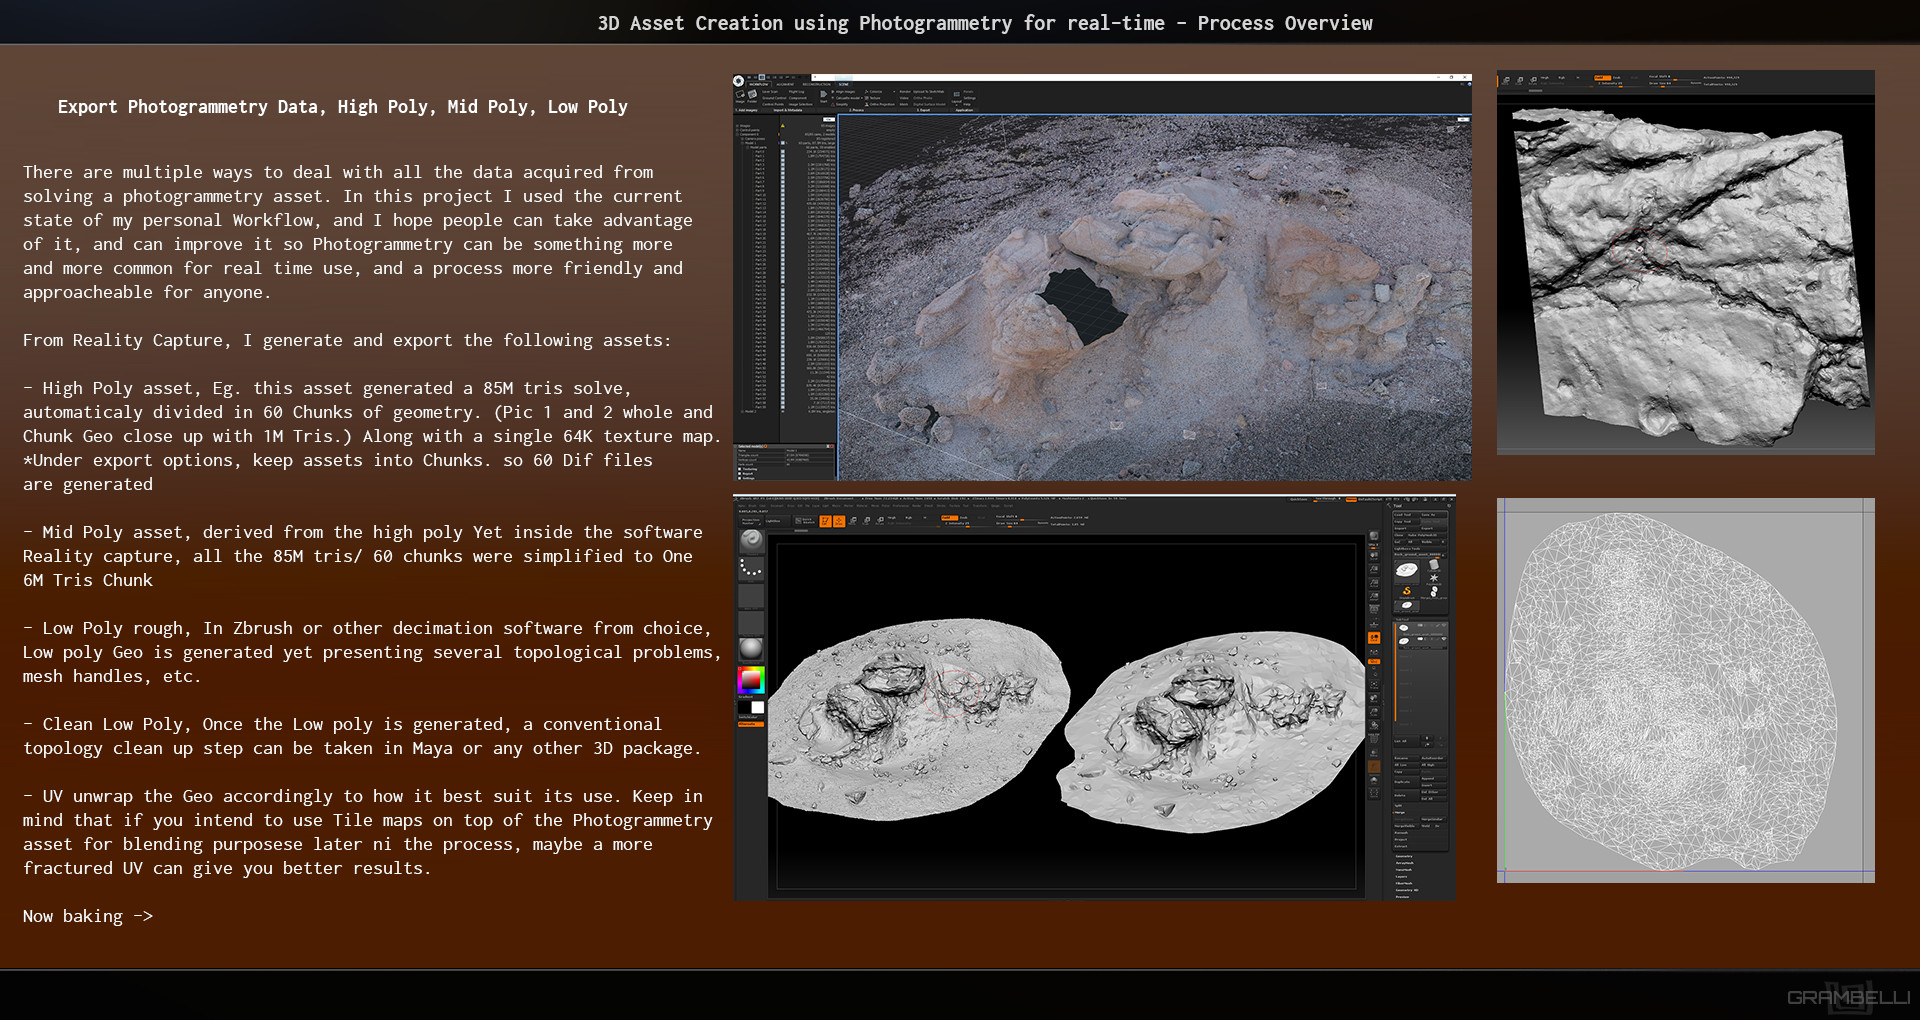 Using Photogrammetry for Real Projects